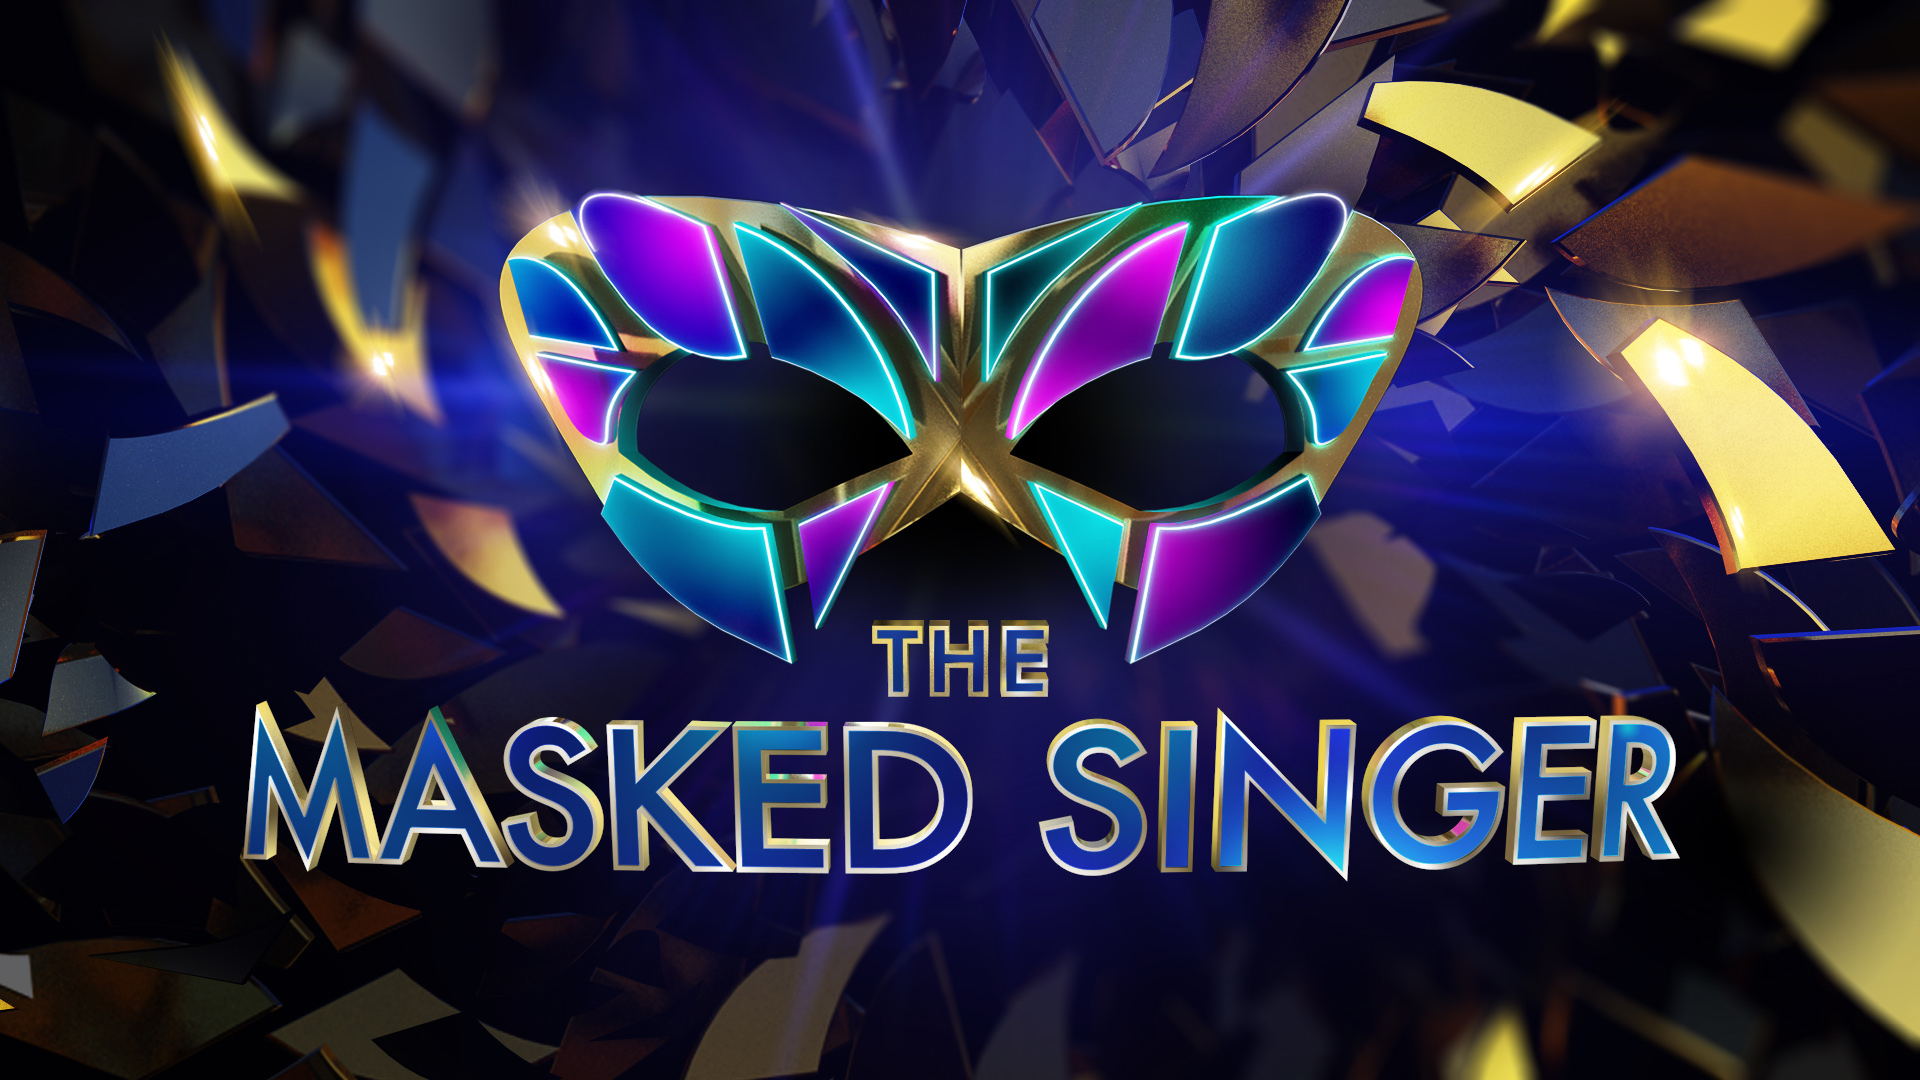 Where is judge Ken Jeong? The Masked Singer UK launches with Mo Gilligan in 2020